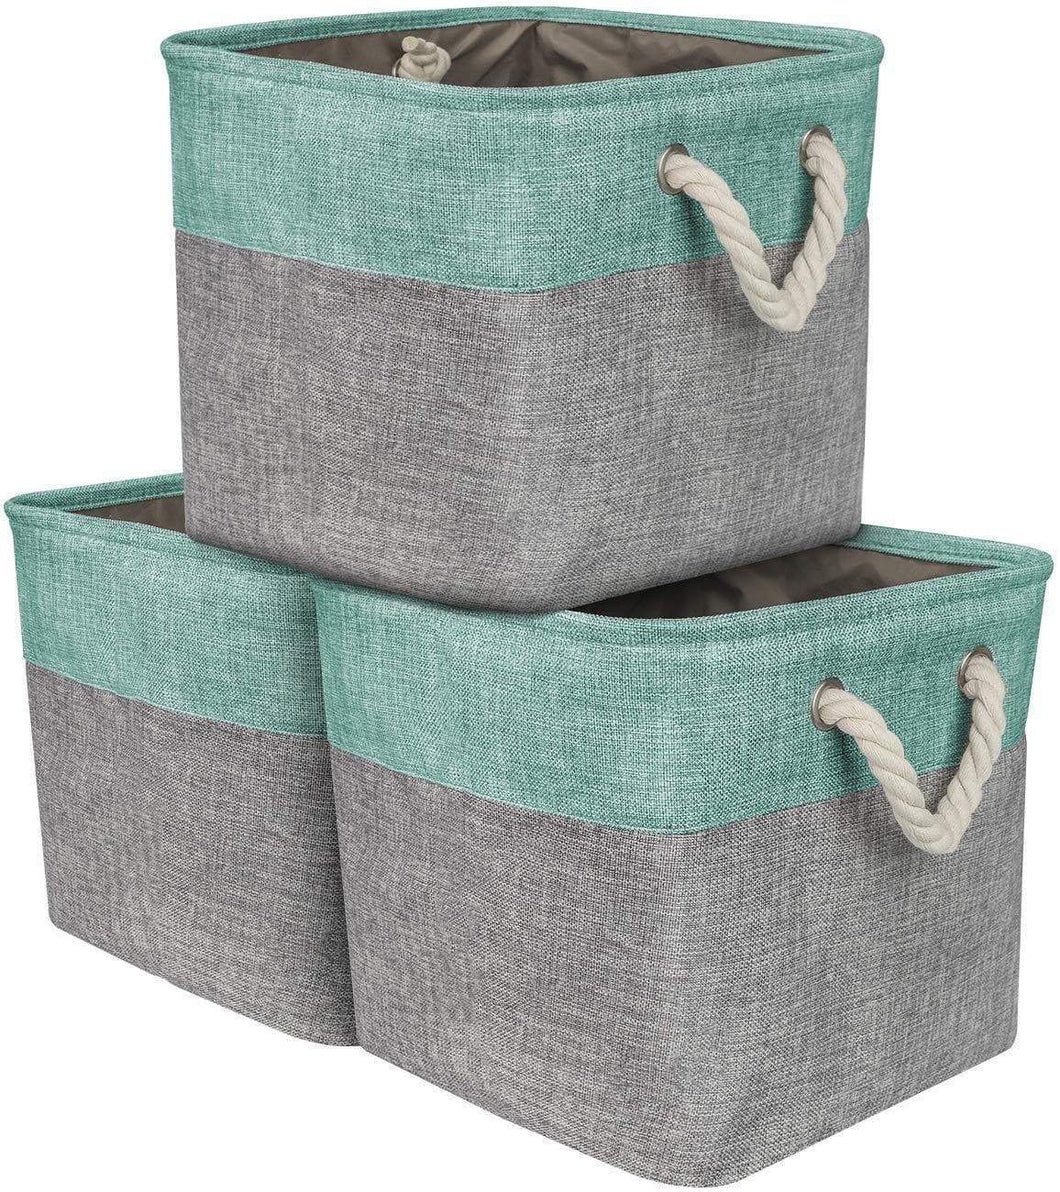 Sorbus Storage Large Basket Set [3-Pack] Big Rectangular Fabric Collapsible Organizer Bin with Cotton Rope Carry Handles for Linens, Toys, Clothes, Kids Room, Nursery (Woven Rope Basket - Teal)